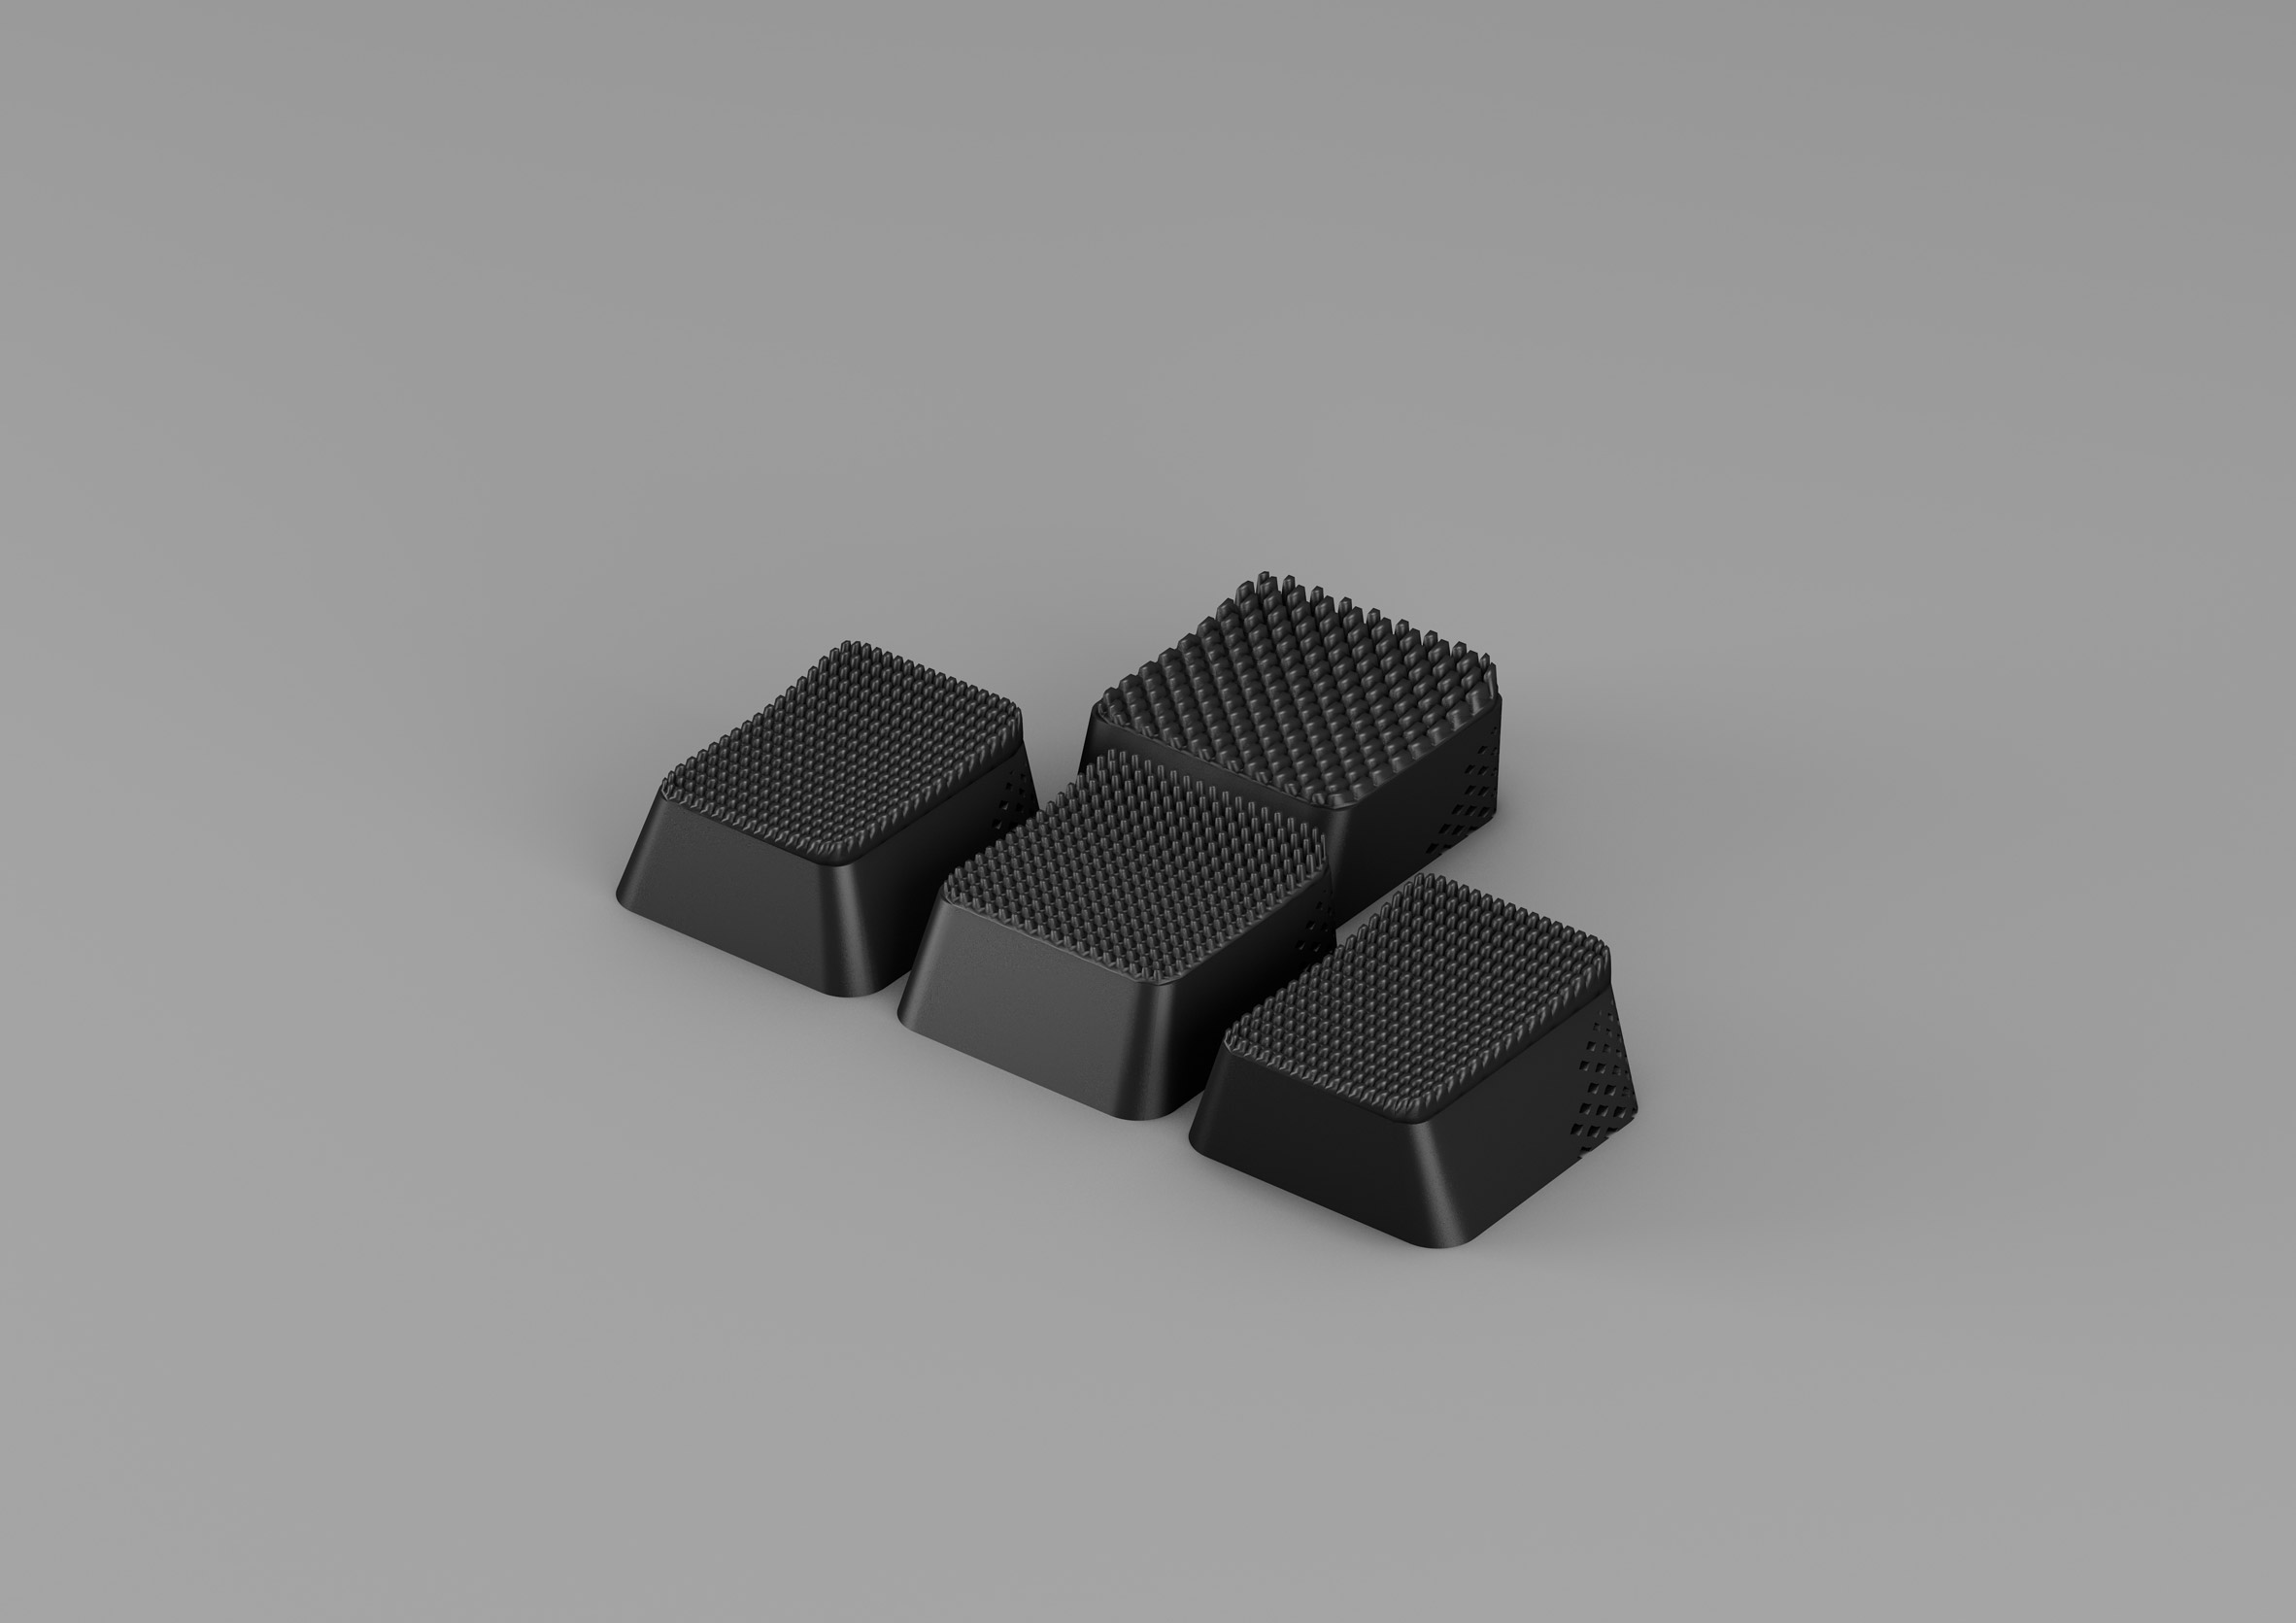 IKEA reveals 3D-printed accessories designed for gamers